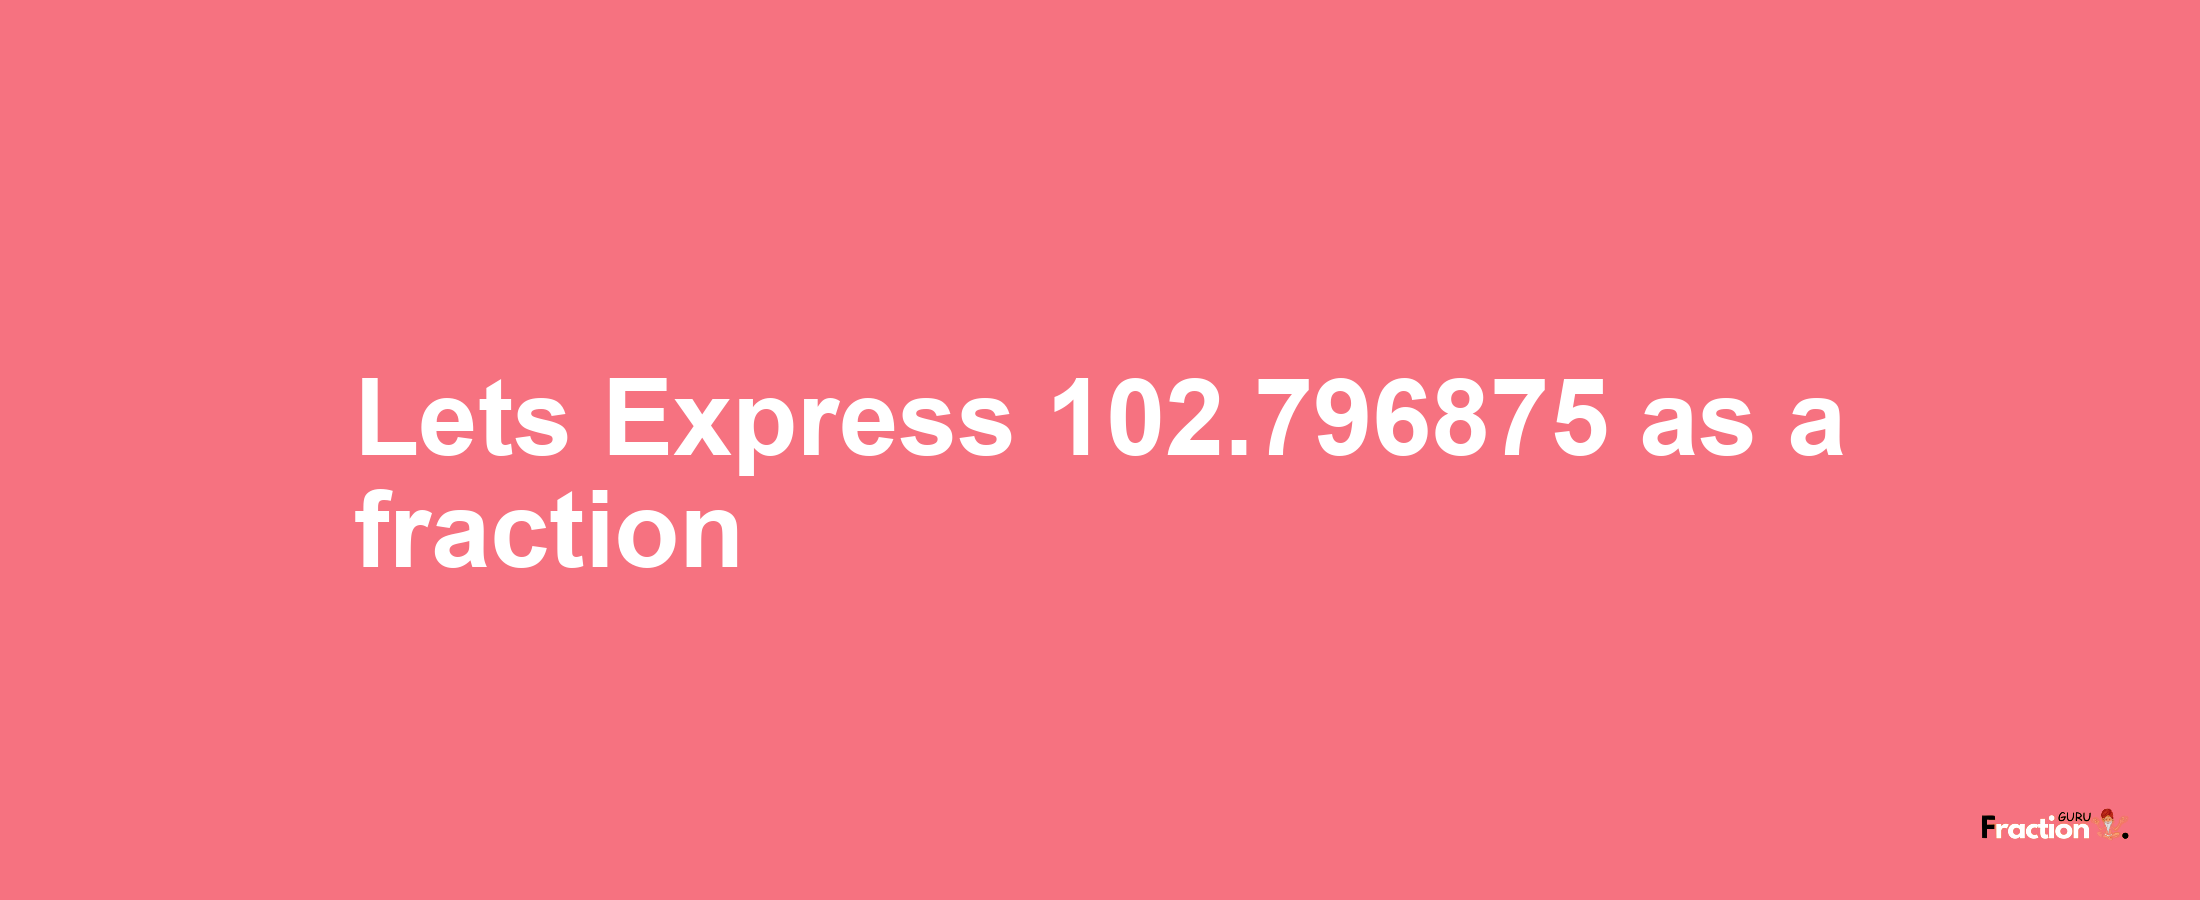 Lets Express 102.796875 as afraction